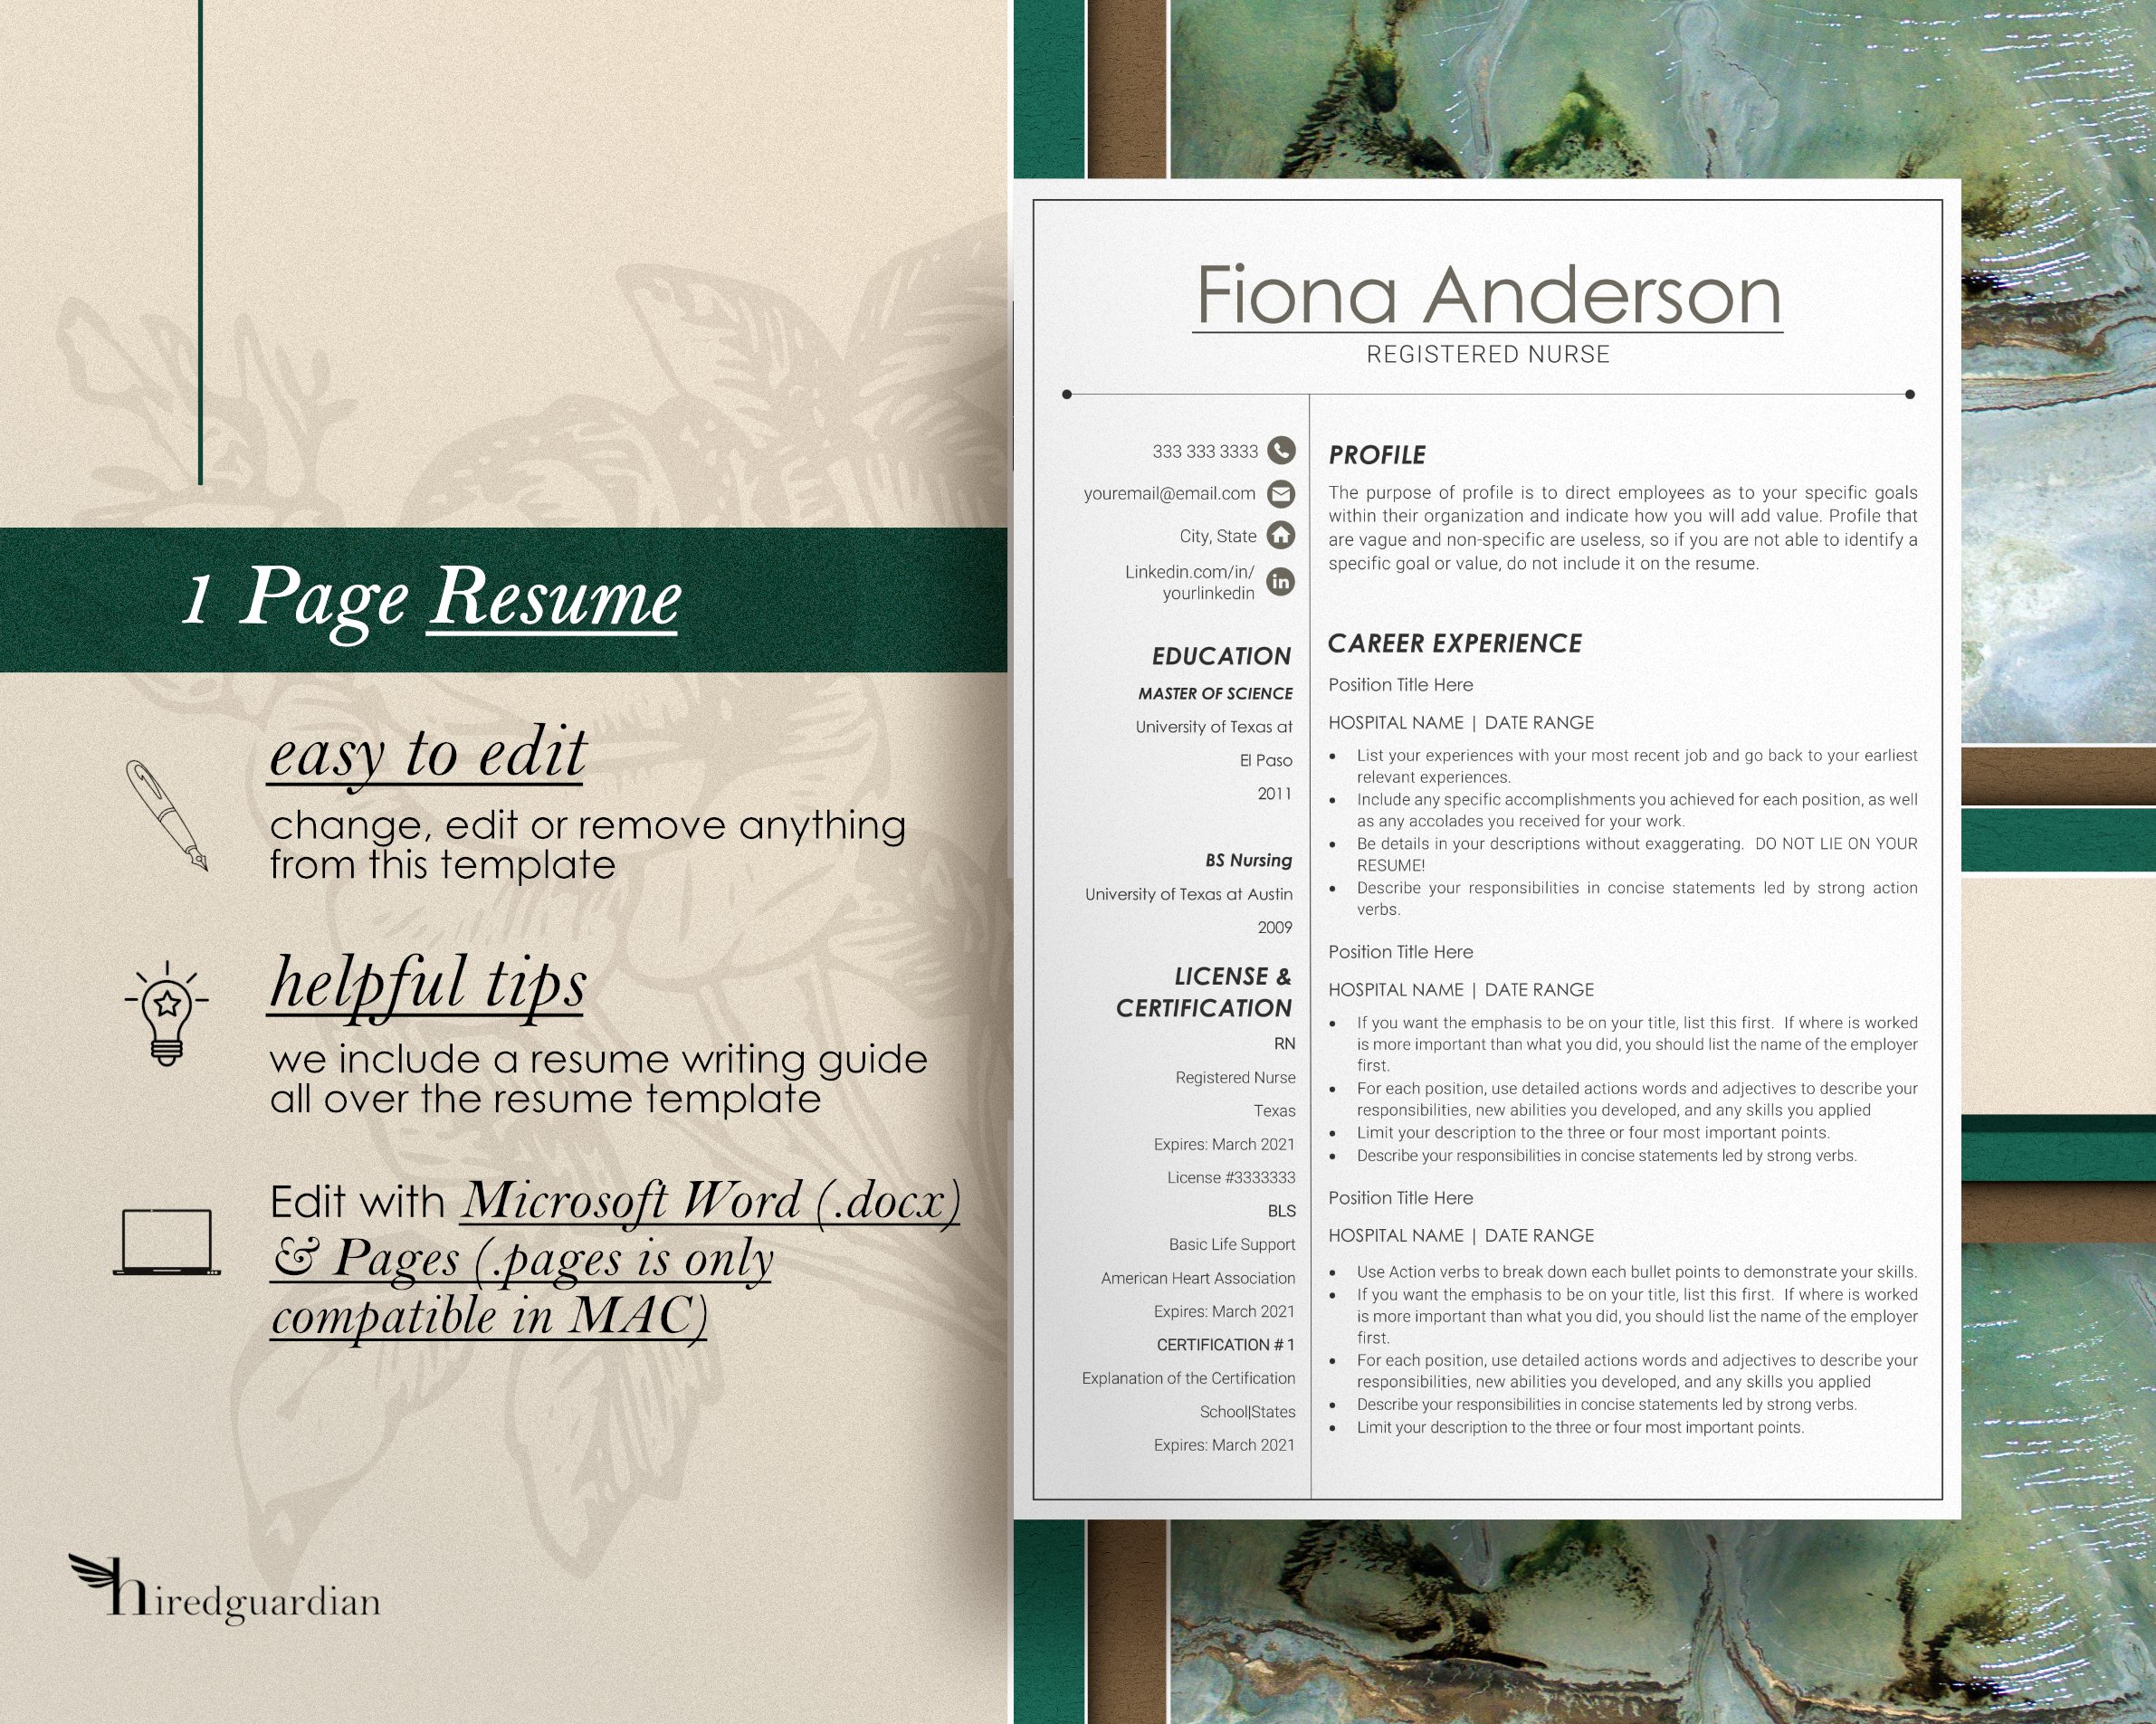 Green and white resume with a green border.